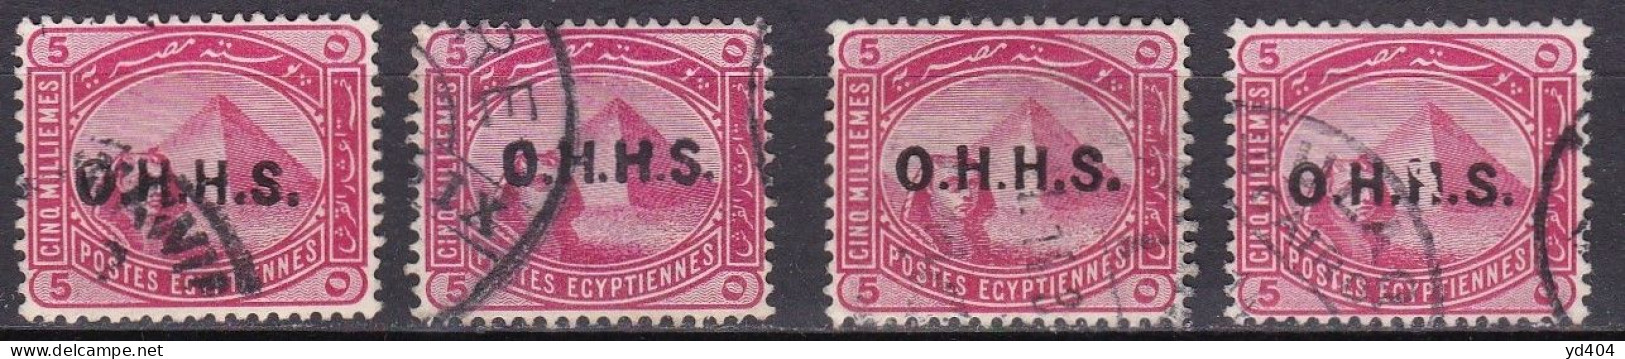 EG703C – EGYPT – OFFICIAL – VARIETIES - 1907 – Y&T # 8(x4) USED - Service